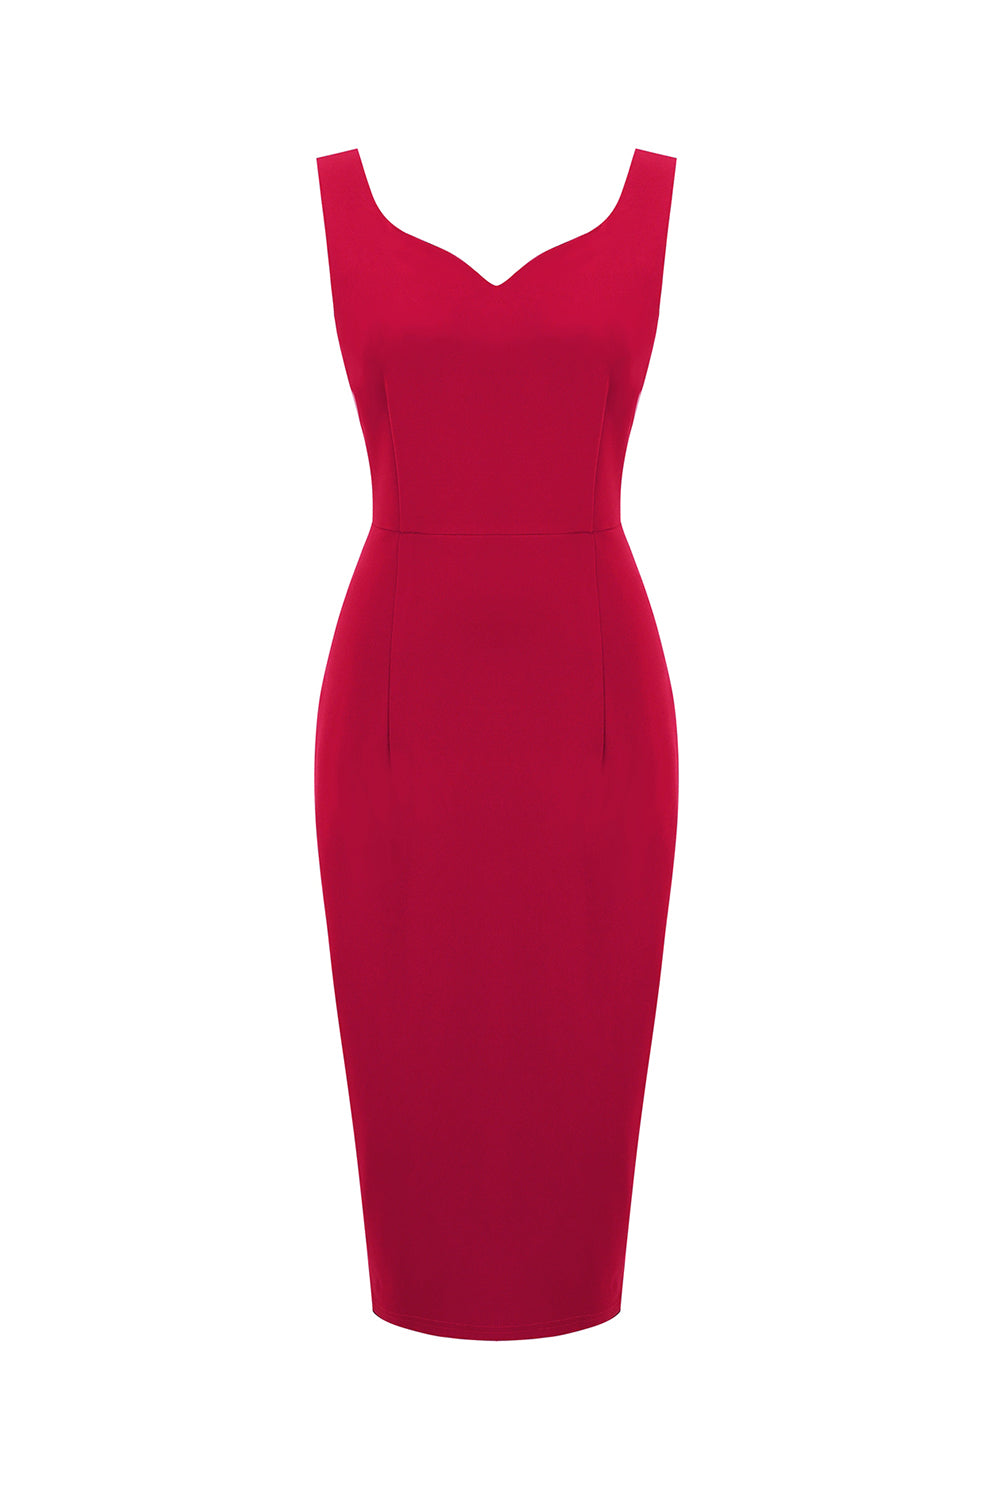 Red Bodycon Vintage 1960s Dress